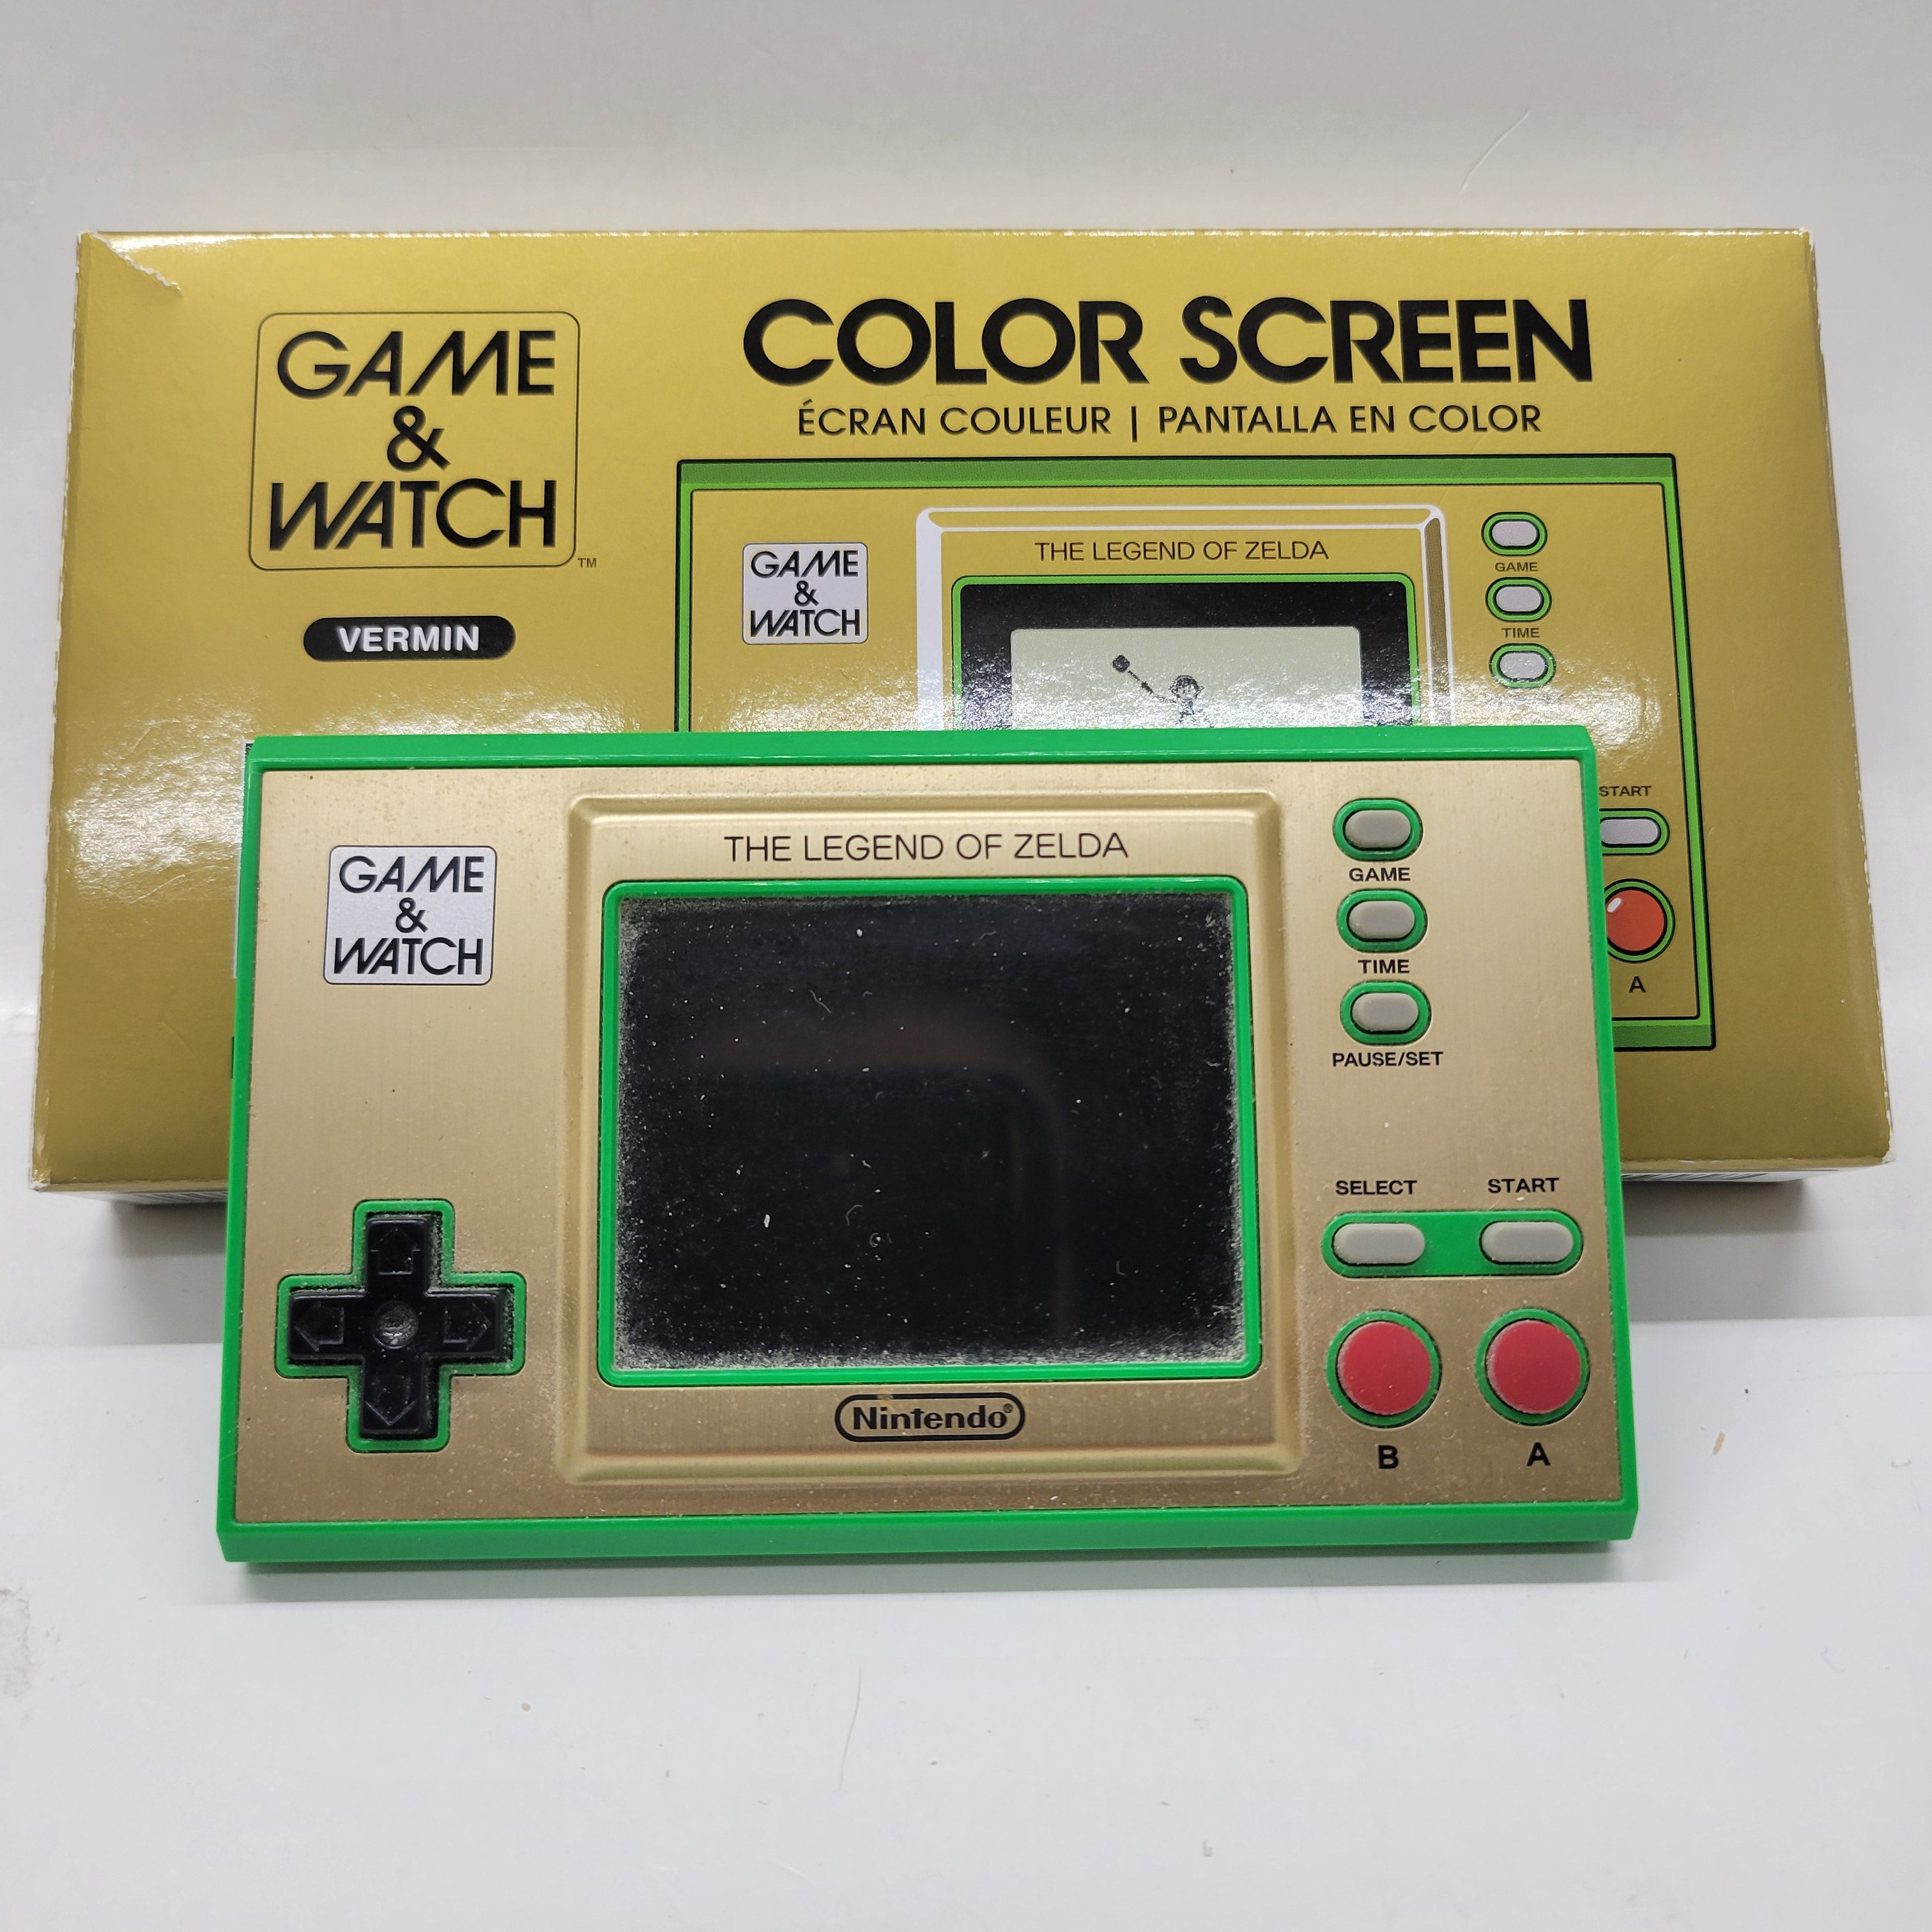 Nintendo Game & Watch Color Screen System at GT Games - Buy